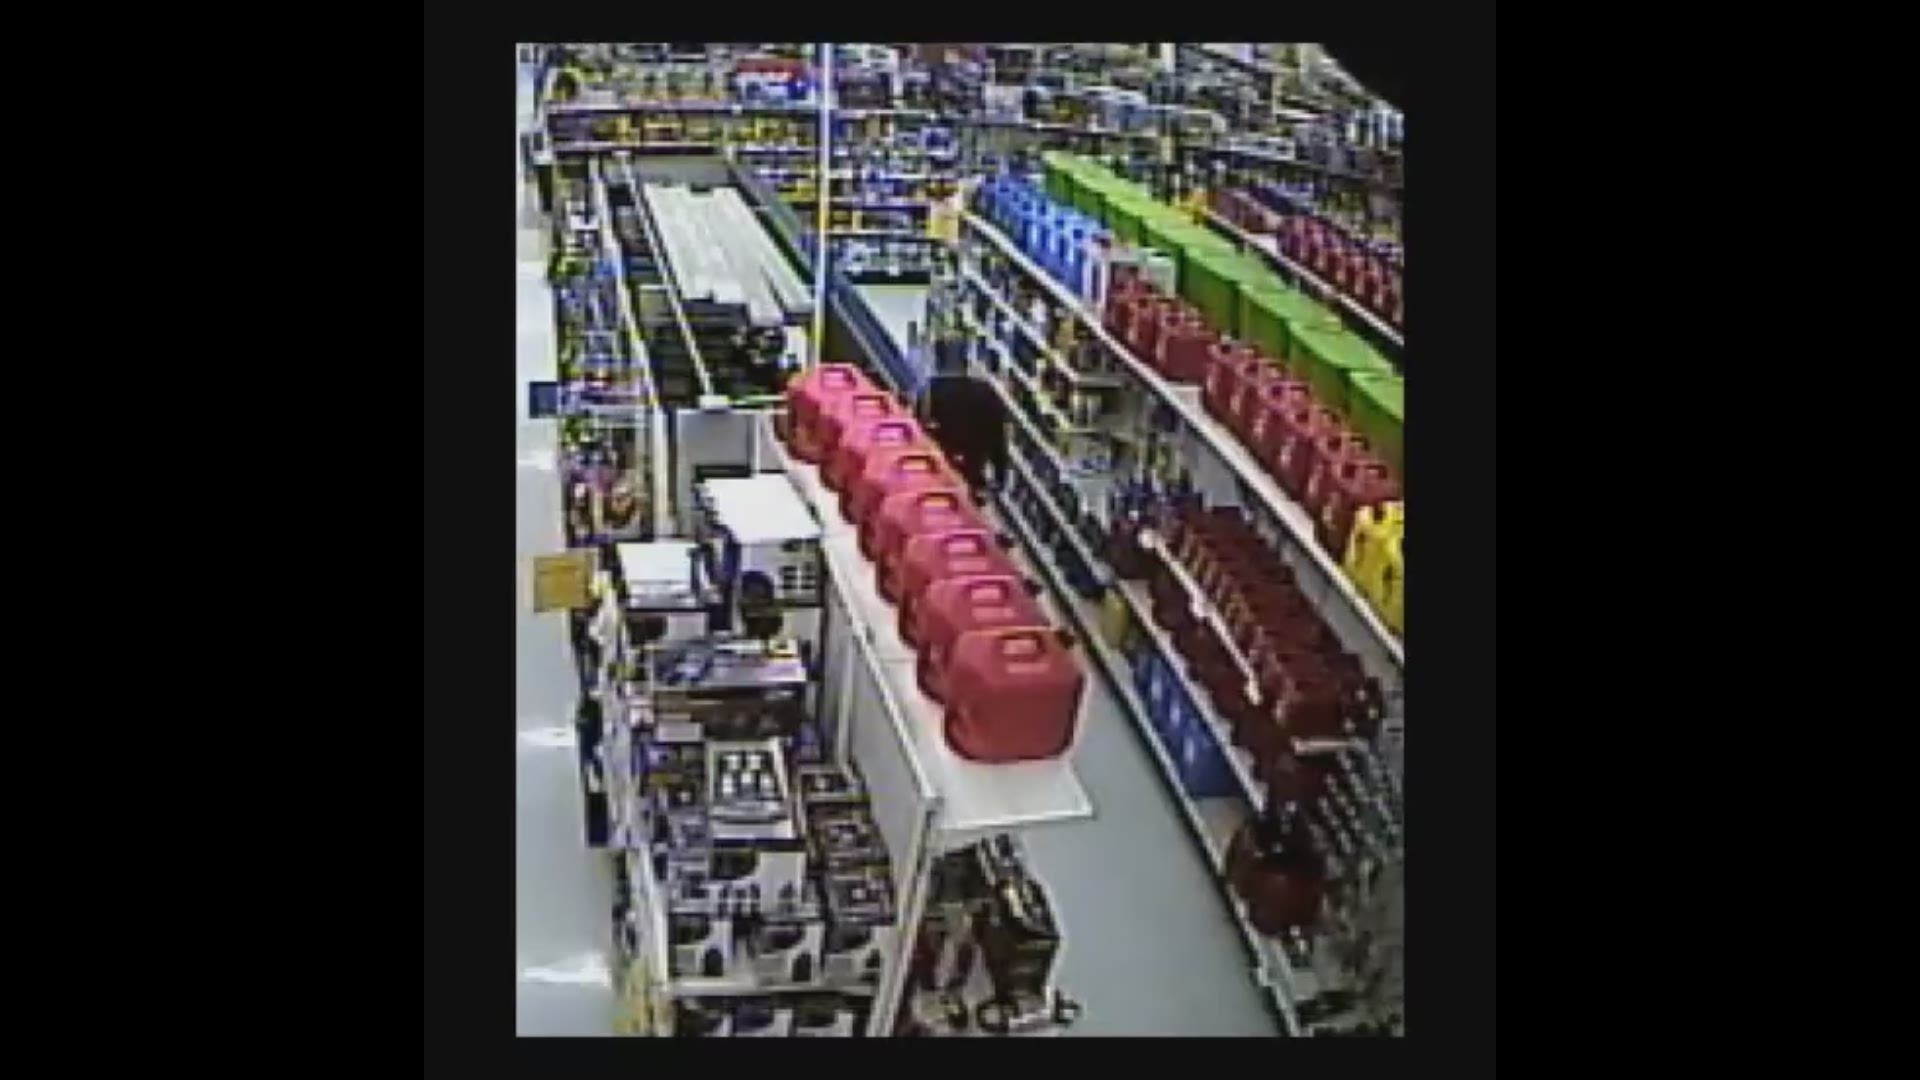 Police are looking to identify a man suspected on intentionally starting a fire inside a Kmart store in Oakdale.